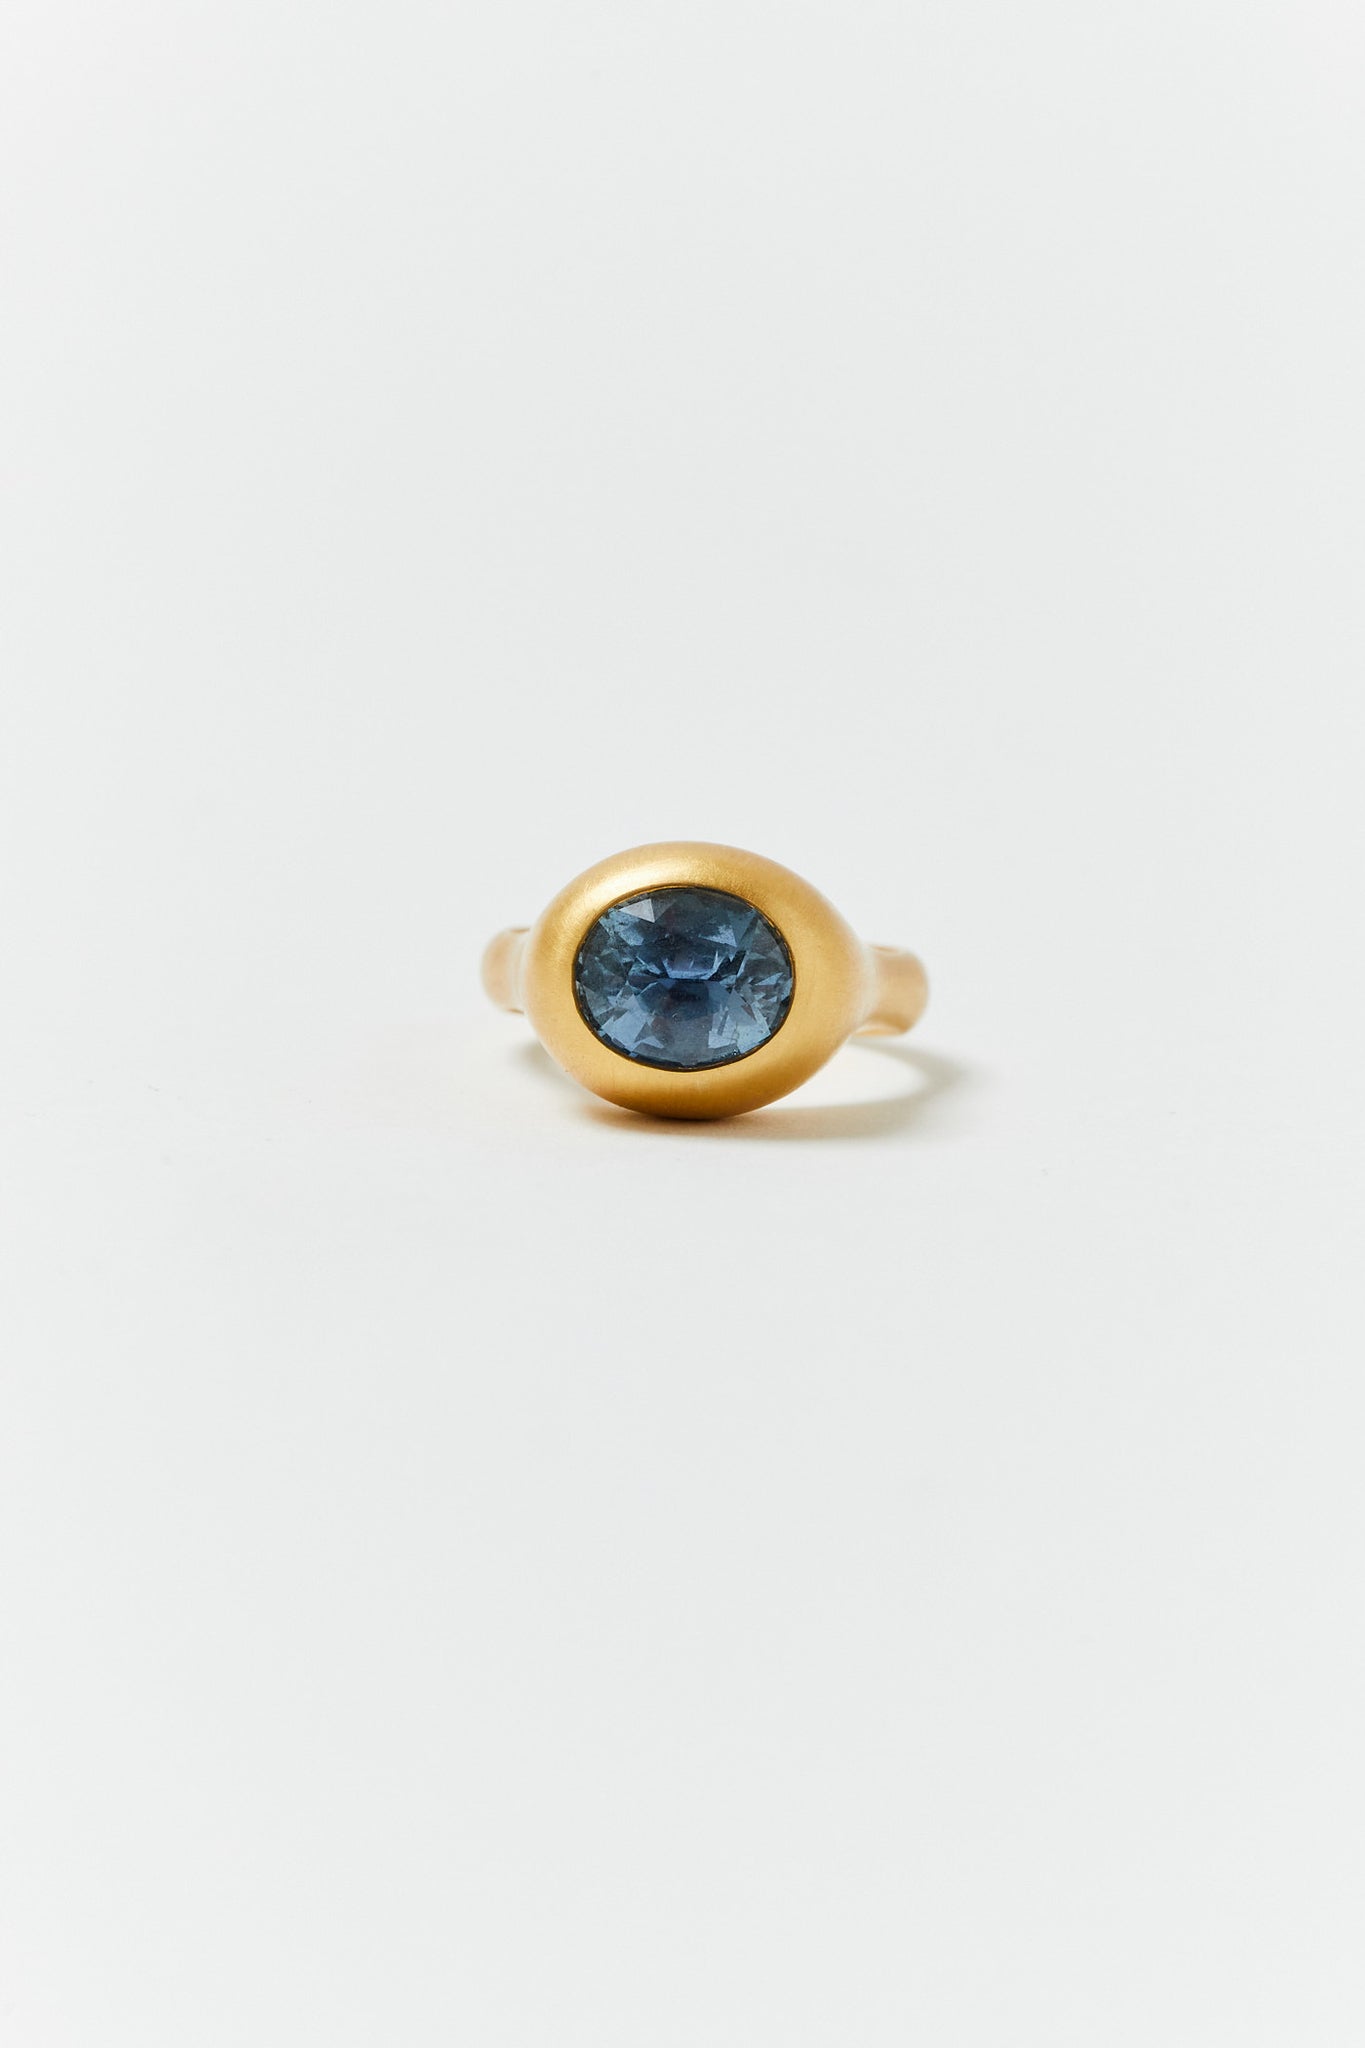 Oval Gray Blue Saphire Ring